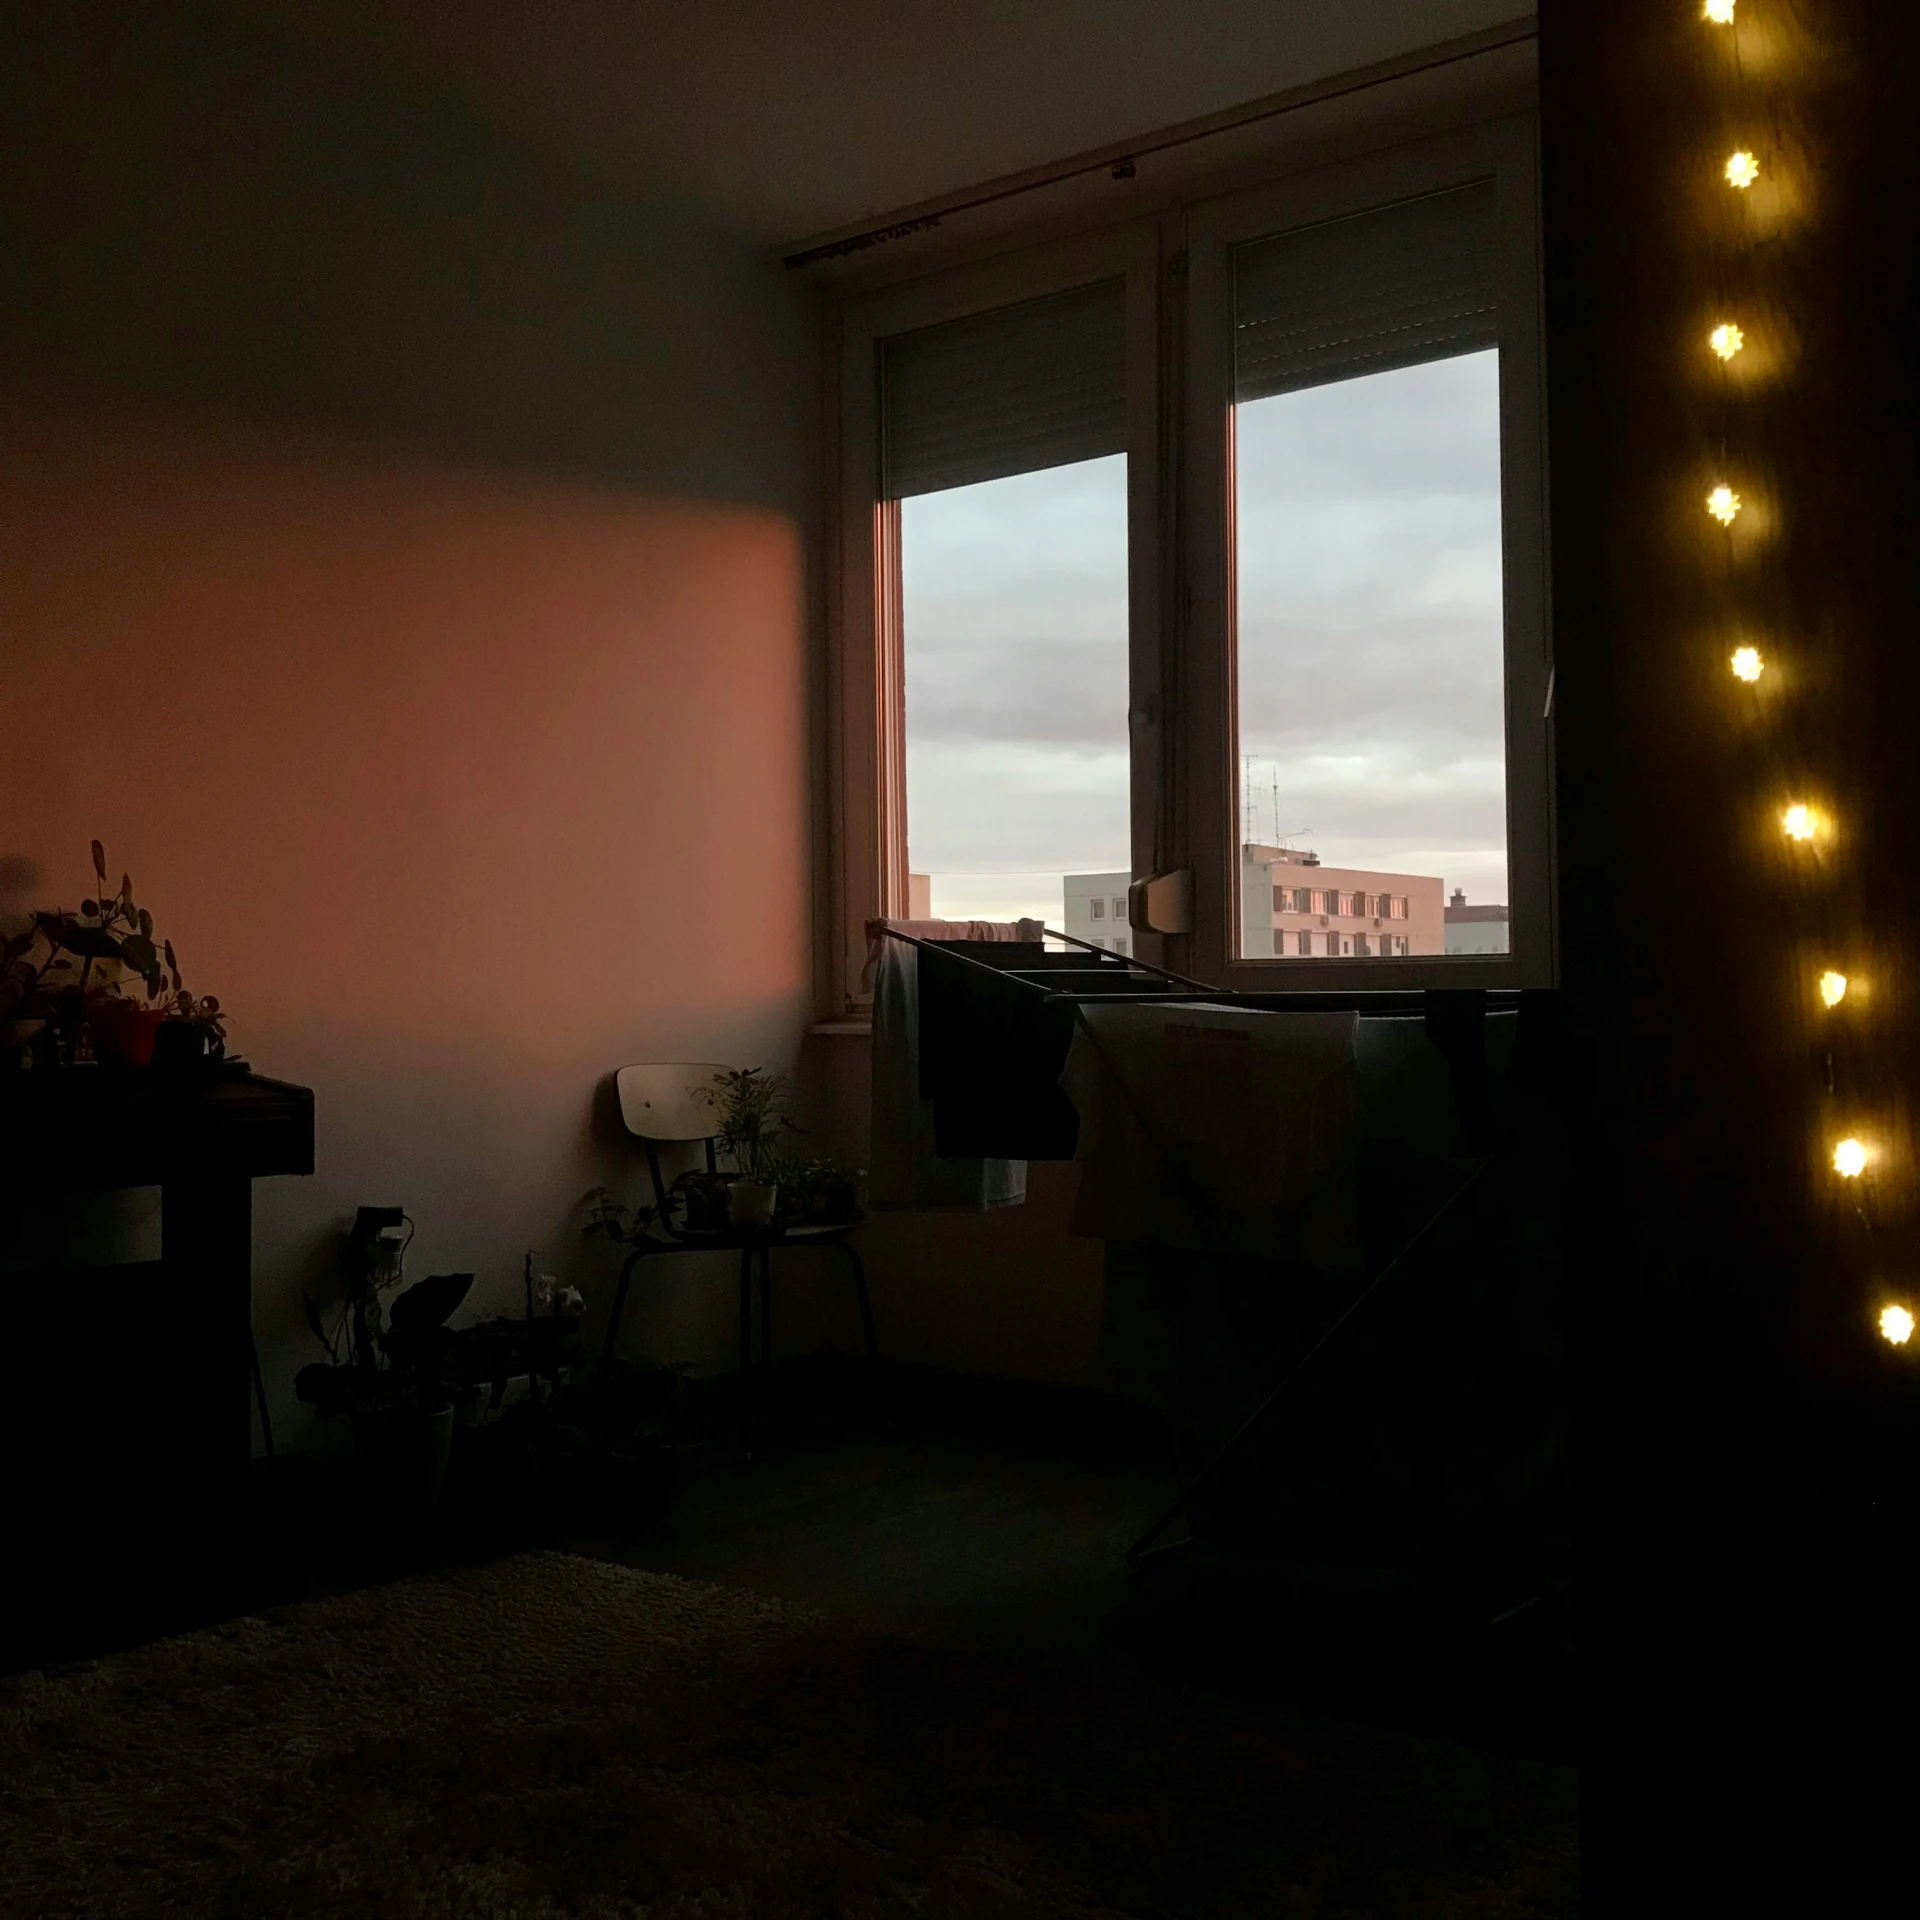 the lights on a window can be seen in this dim room